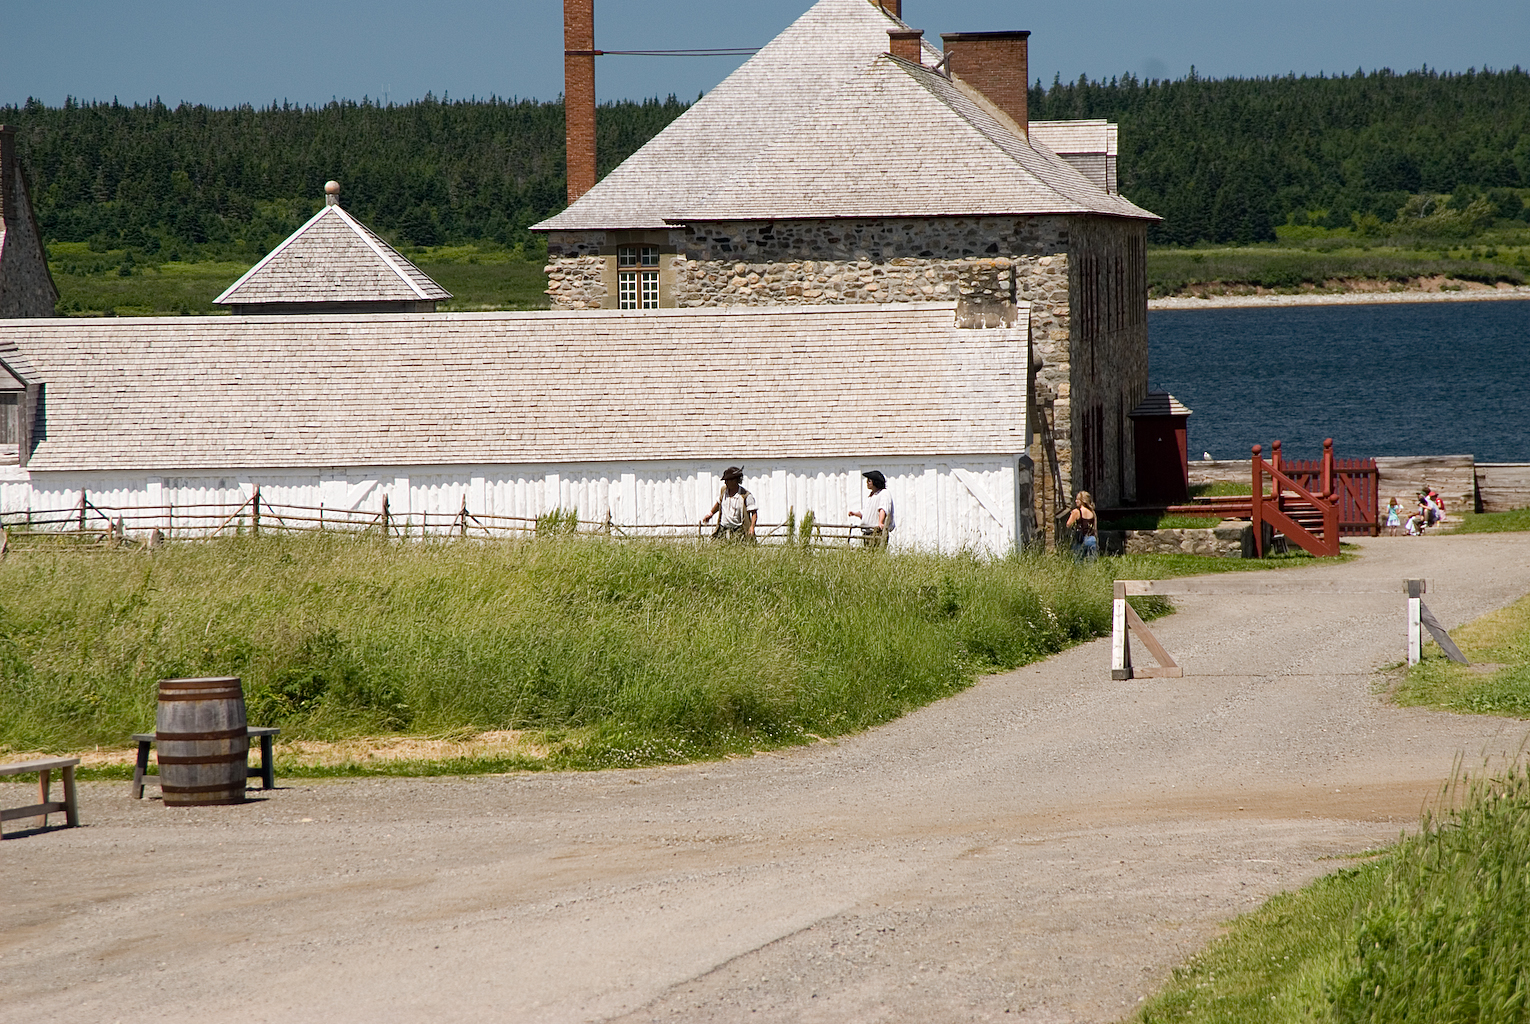 Fortress Louisbourg Fence Building.jpg